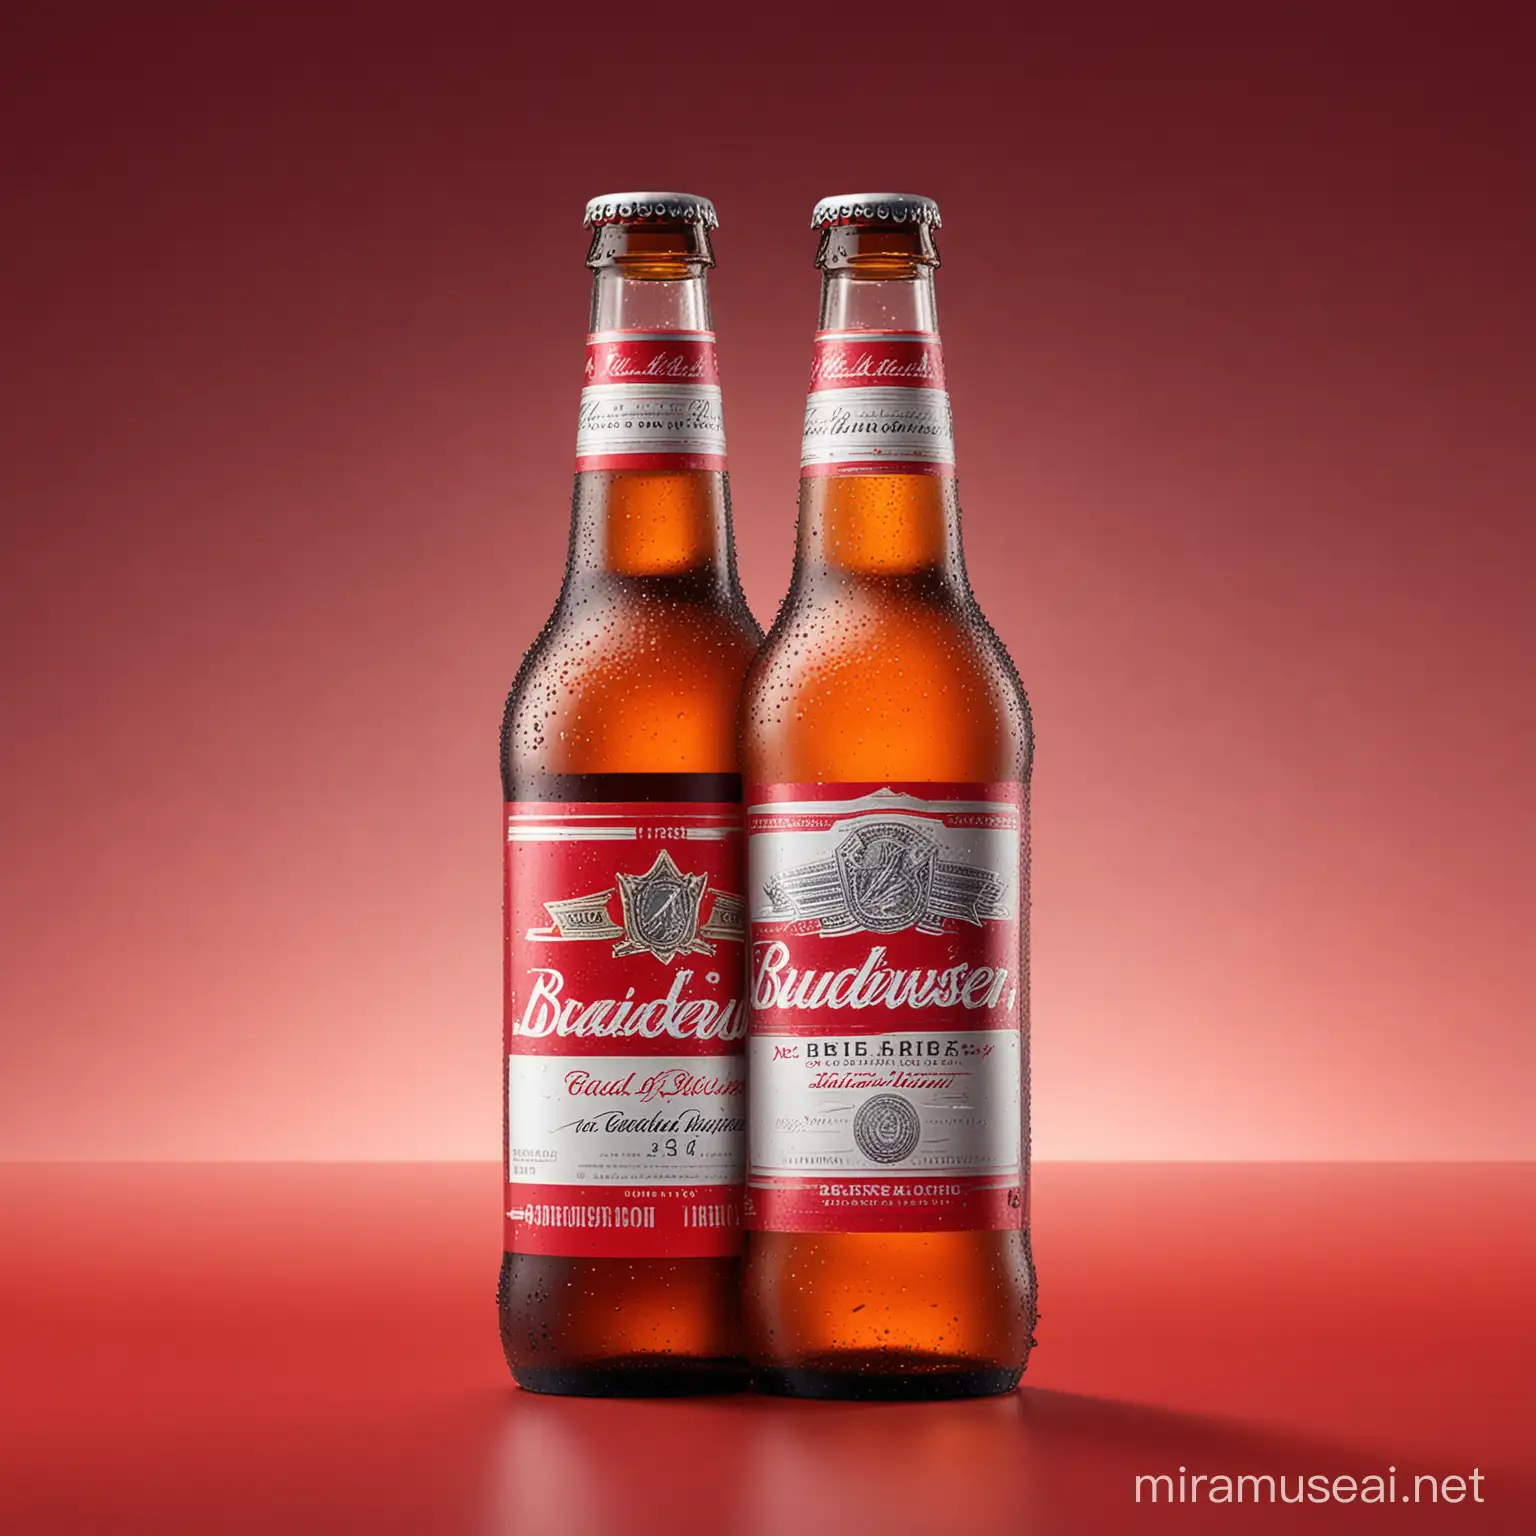 Chilled Budweiser Beer Bottle on Red Gradient Background